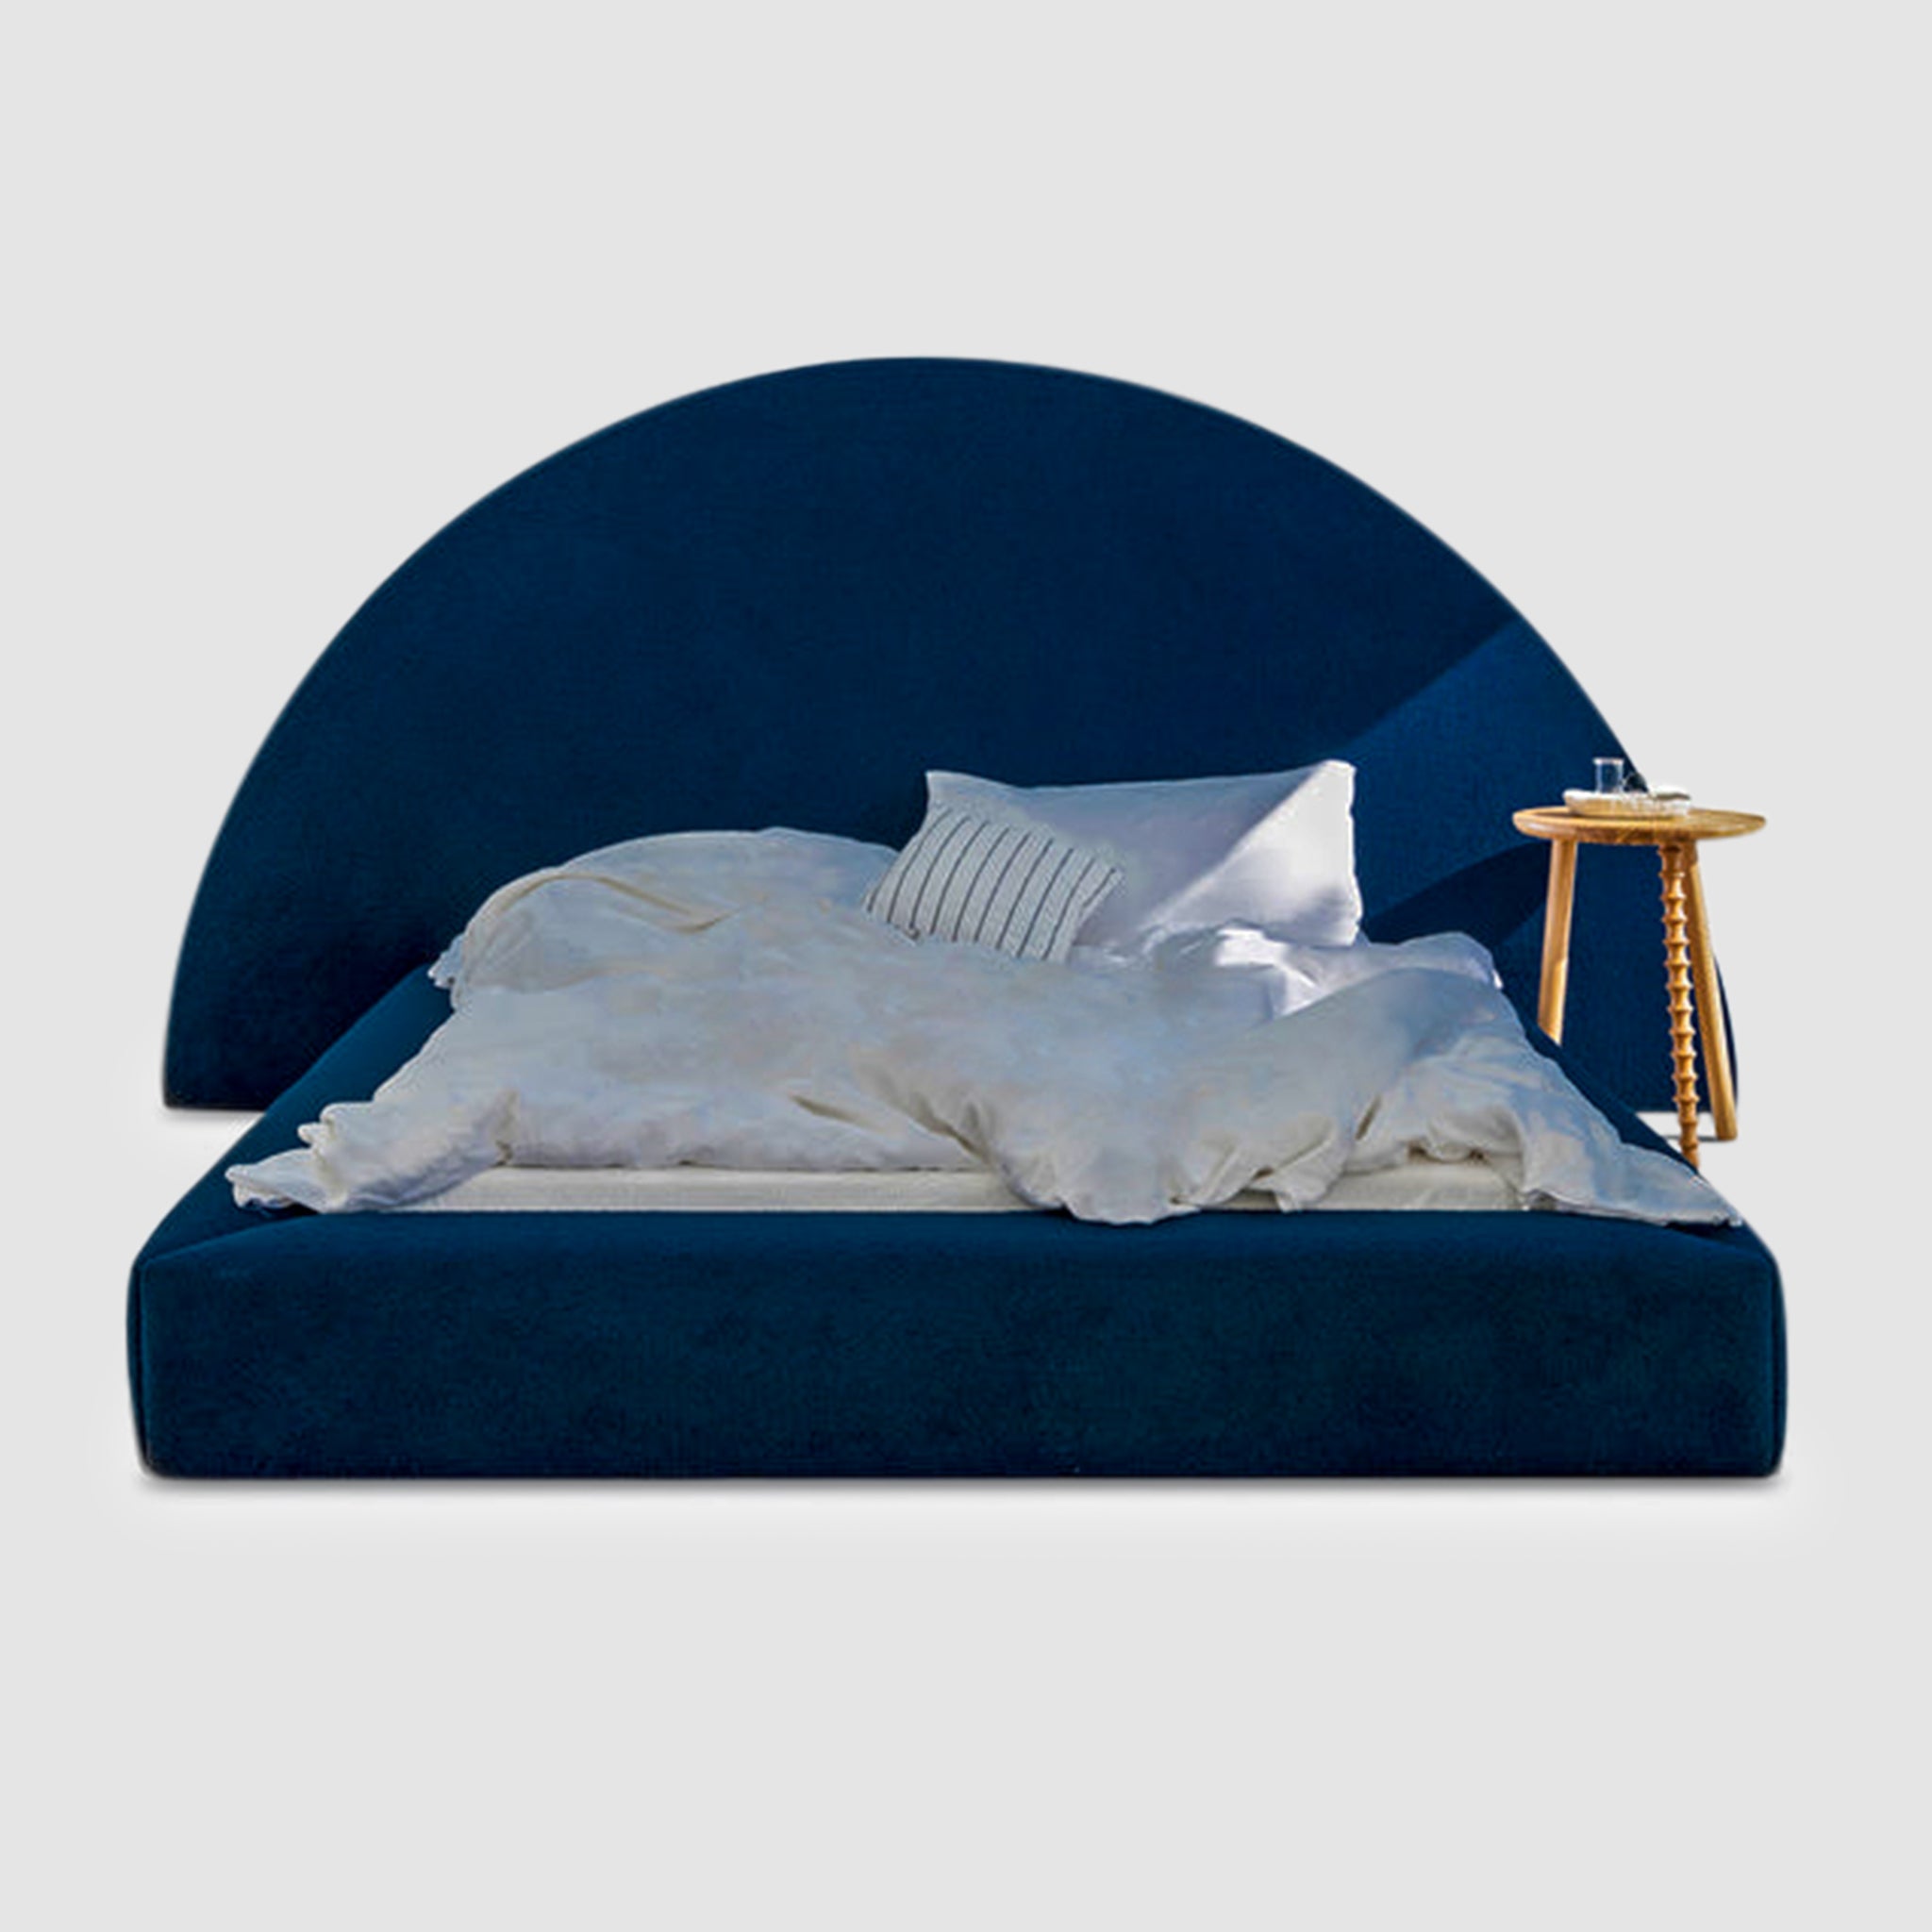 Blue upholstered bed with a large semi-circular headboard and a low profile frame. This luxurious bed is perfect for adding a touch of style and sophistication to any bedroom.